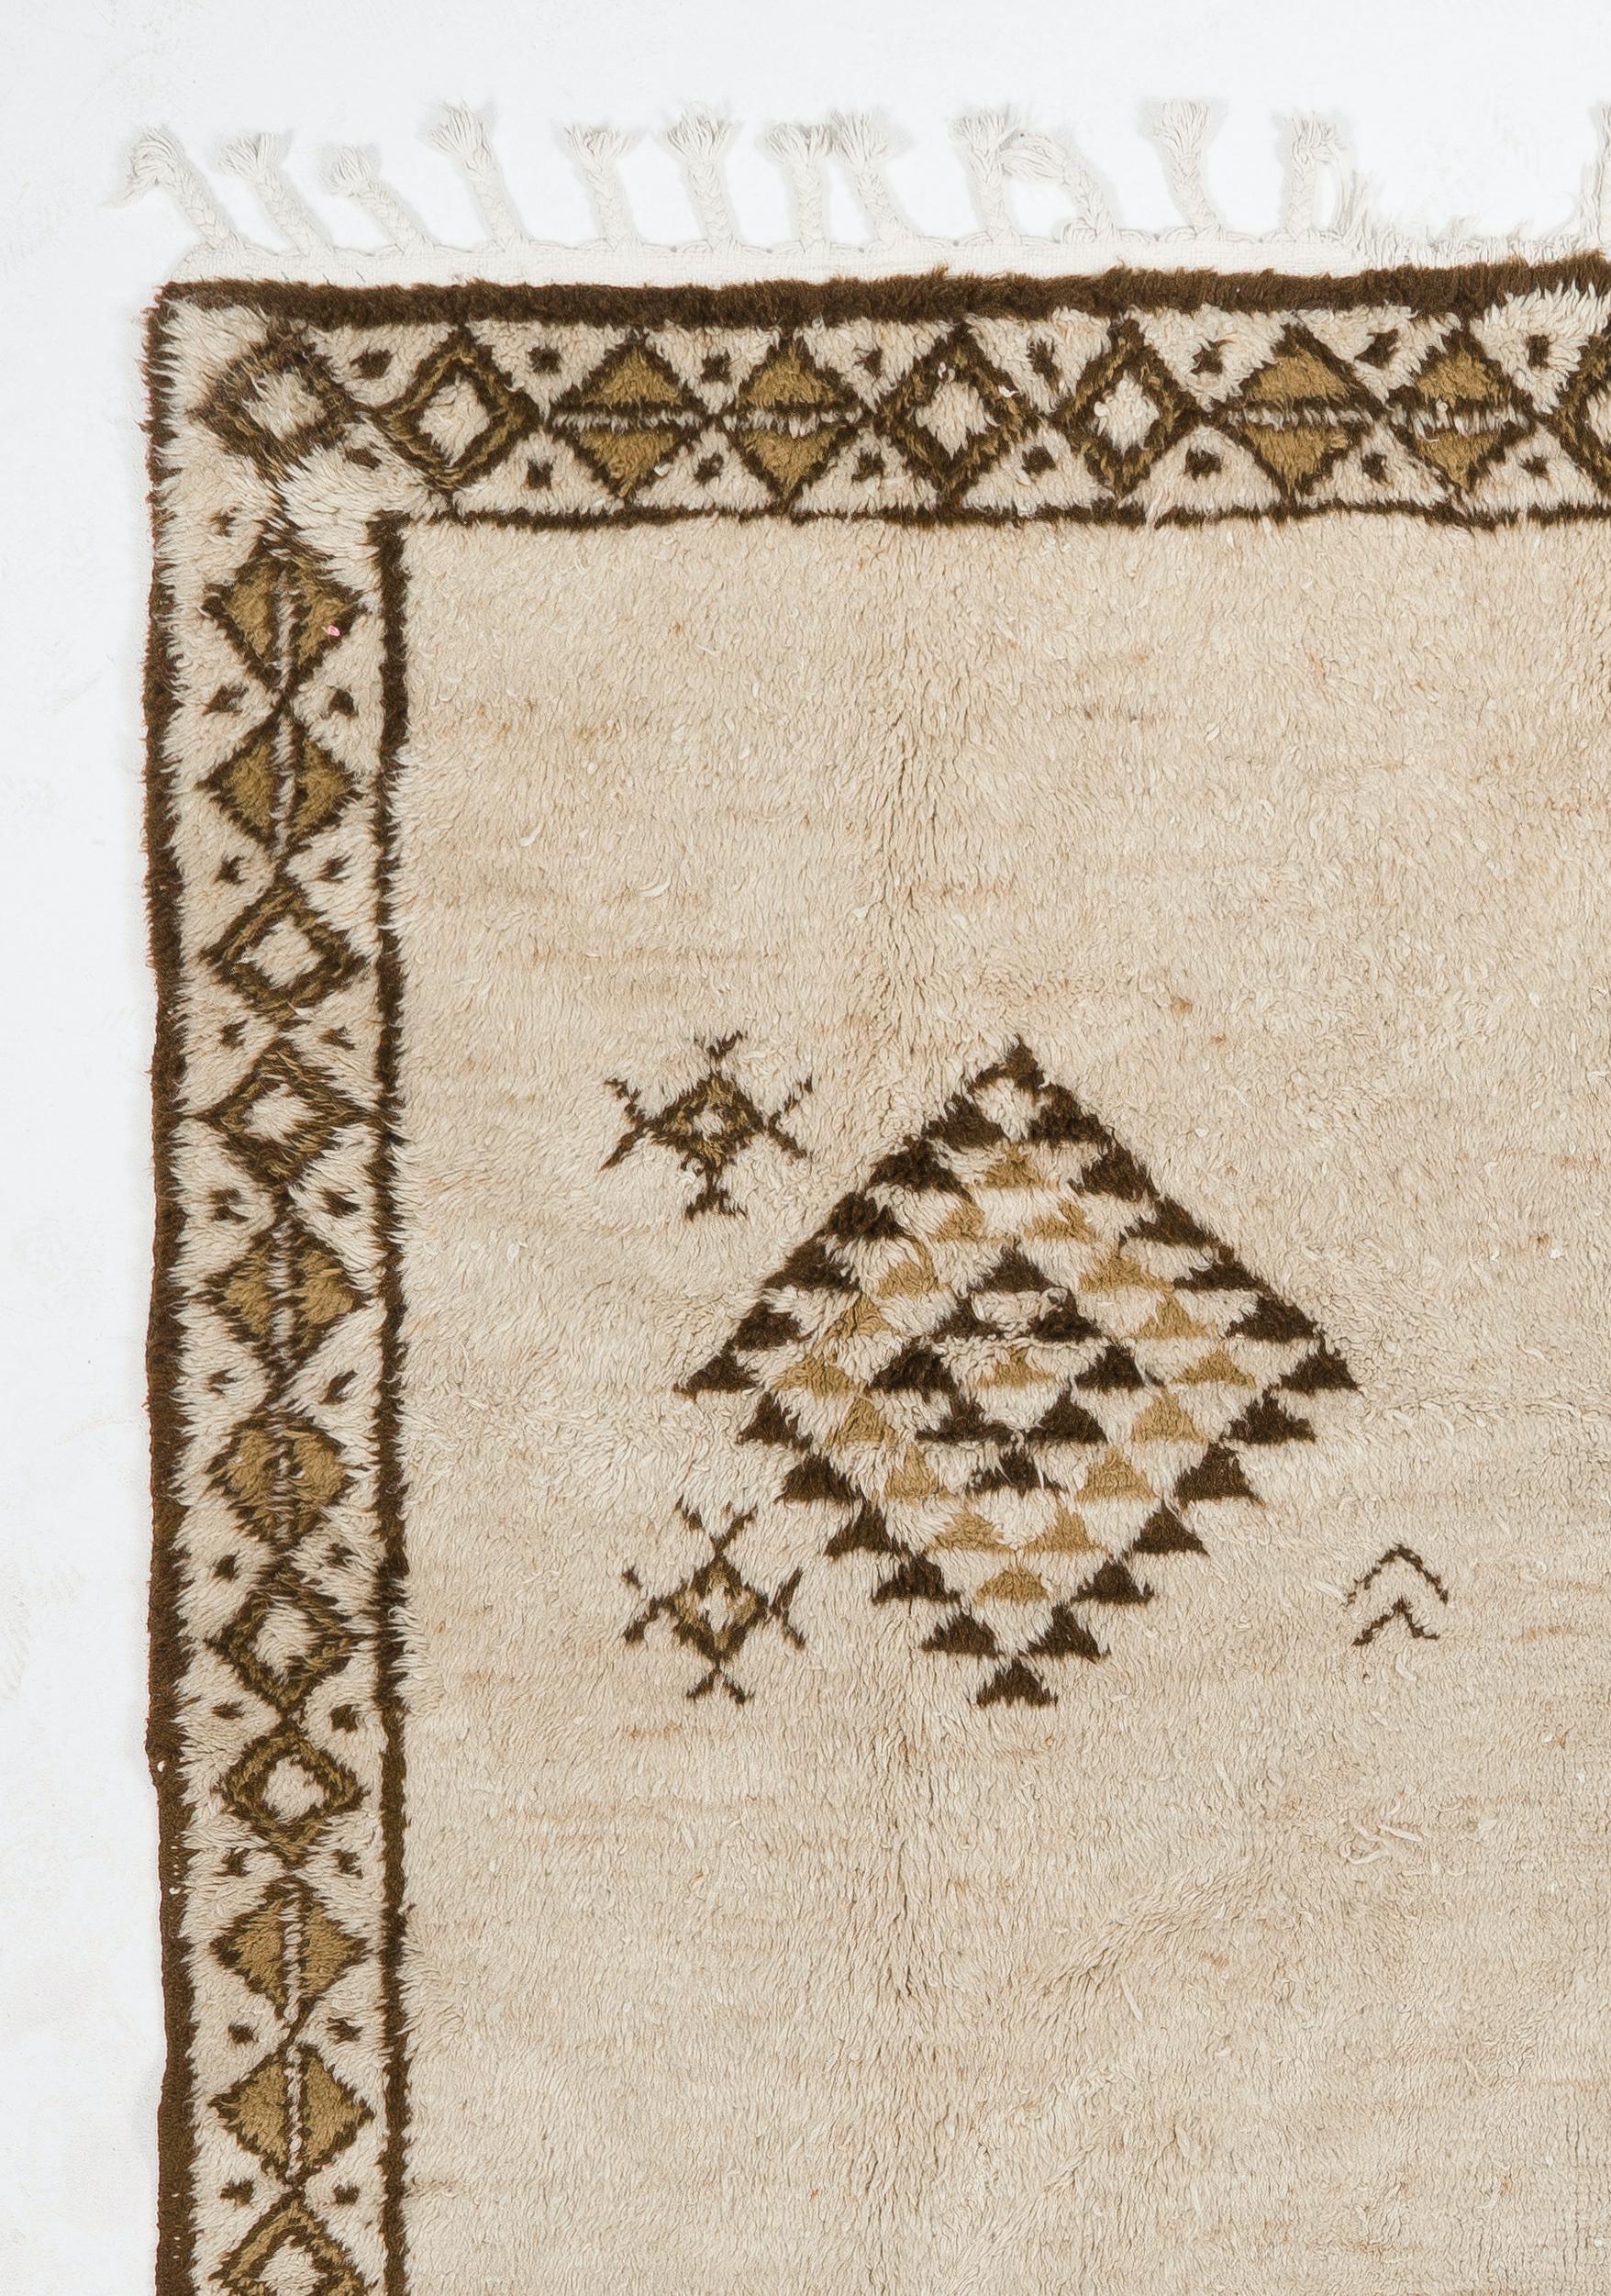 A vintage handmade Central Anatolian “Tulu” rug made of natural un-dyed sheep wool. Measures: 8 x 11 ft.

The rug is available as seen or if requested, it can be custom produced in a different size, color combination and design.